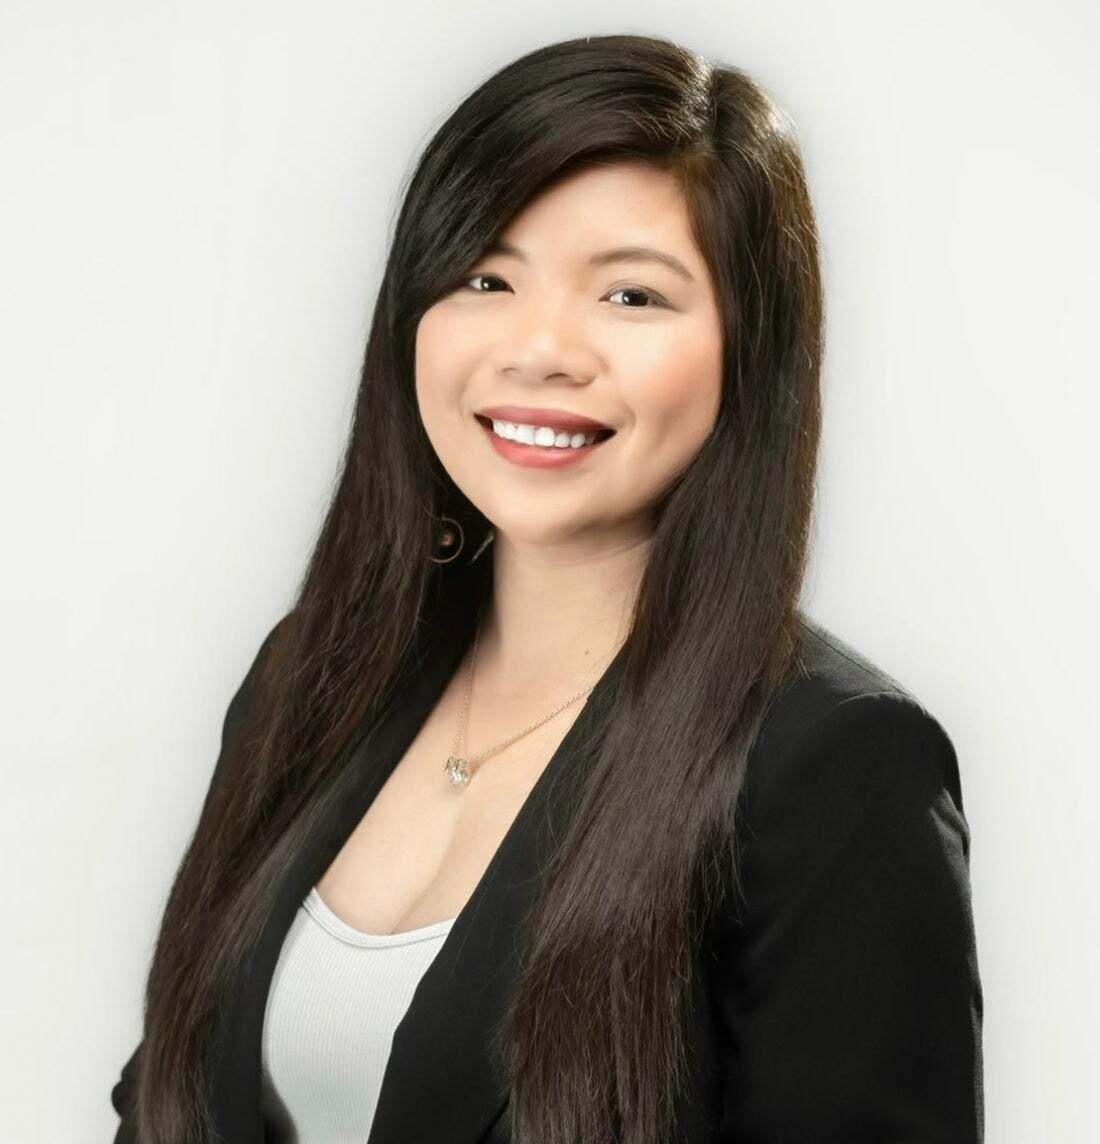 Cathy Le, Real Estate Salesperson in Sacramento, Reliance Partners